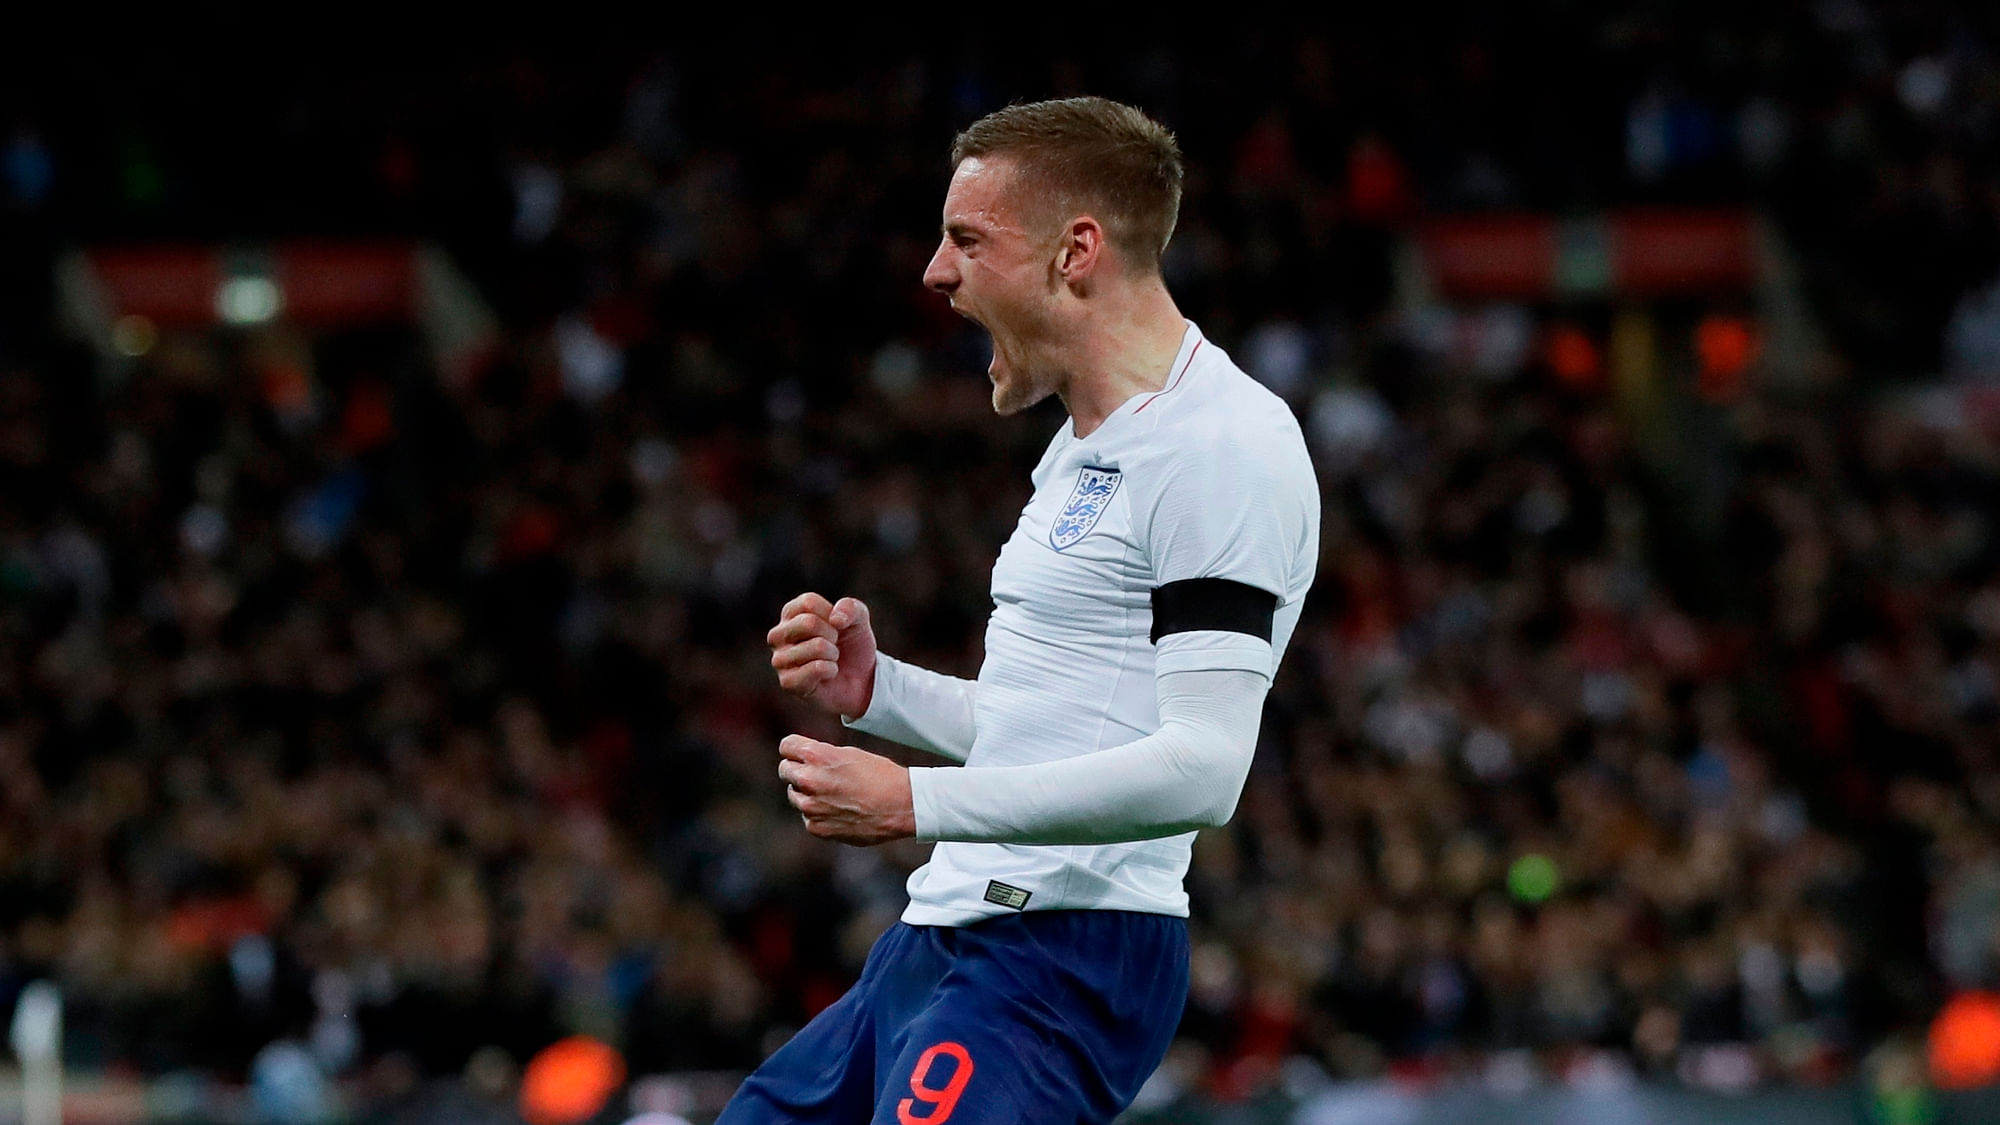 In this Tuesday, March 27, 2018 file photo, England’s Jamie Vardy celebrates after scoring his side’s opening goal during the international friendly soccer match between England and Italy at the Wembley Stadium in London.&nbsp;